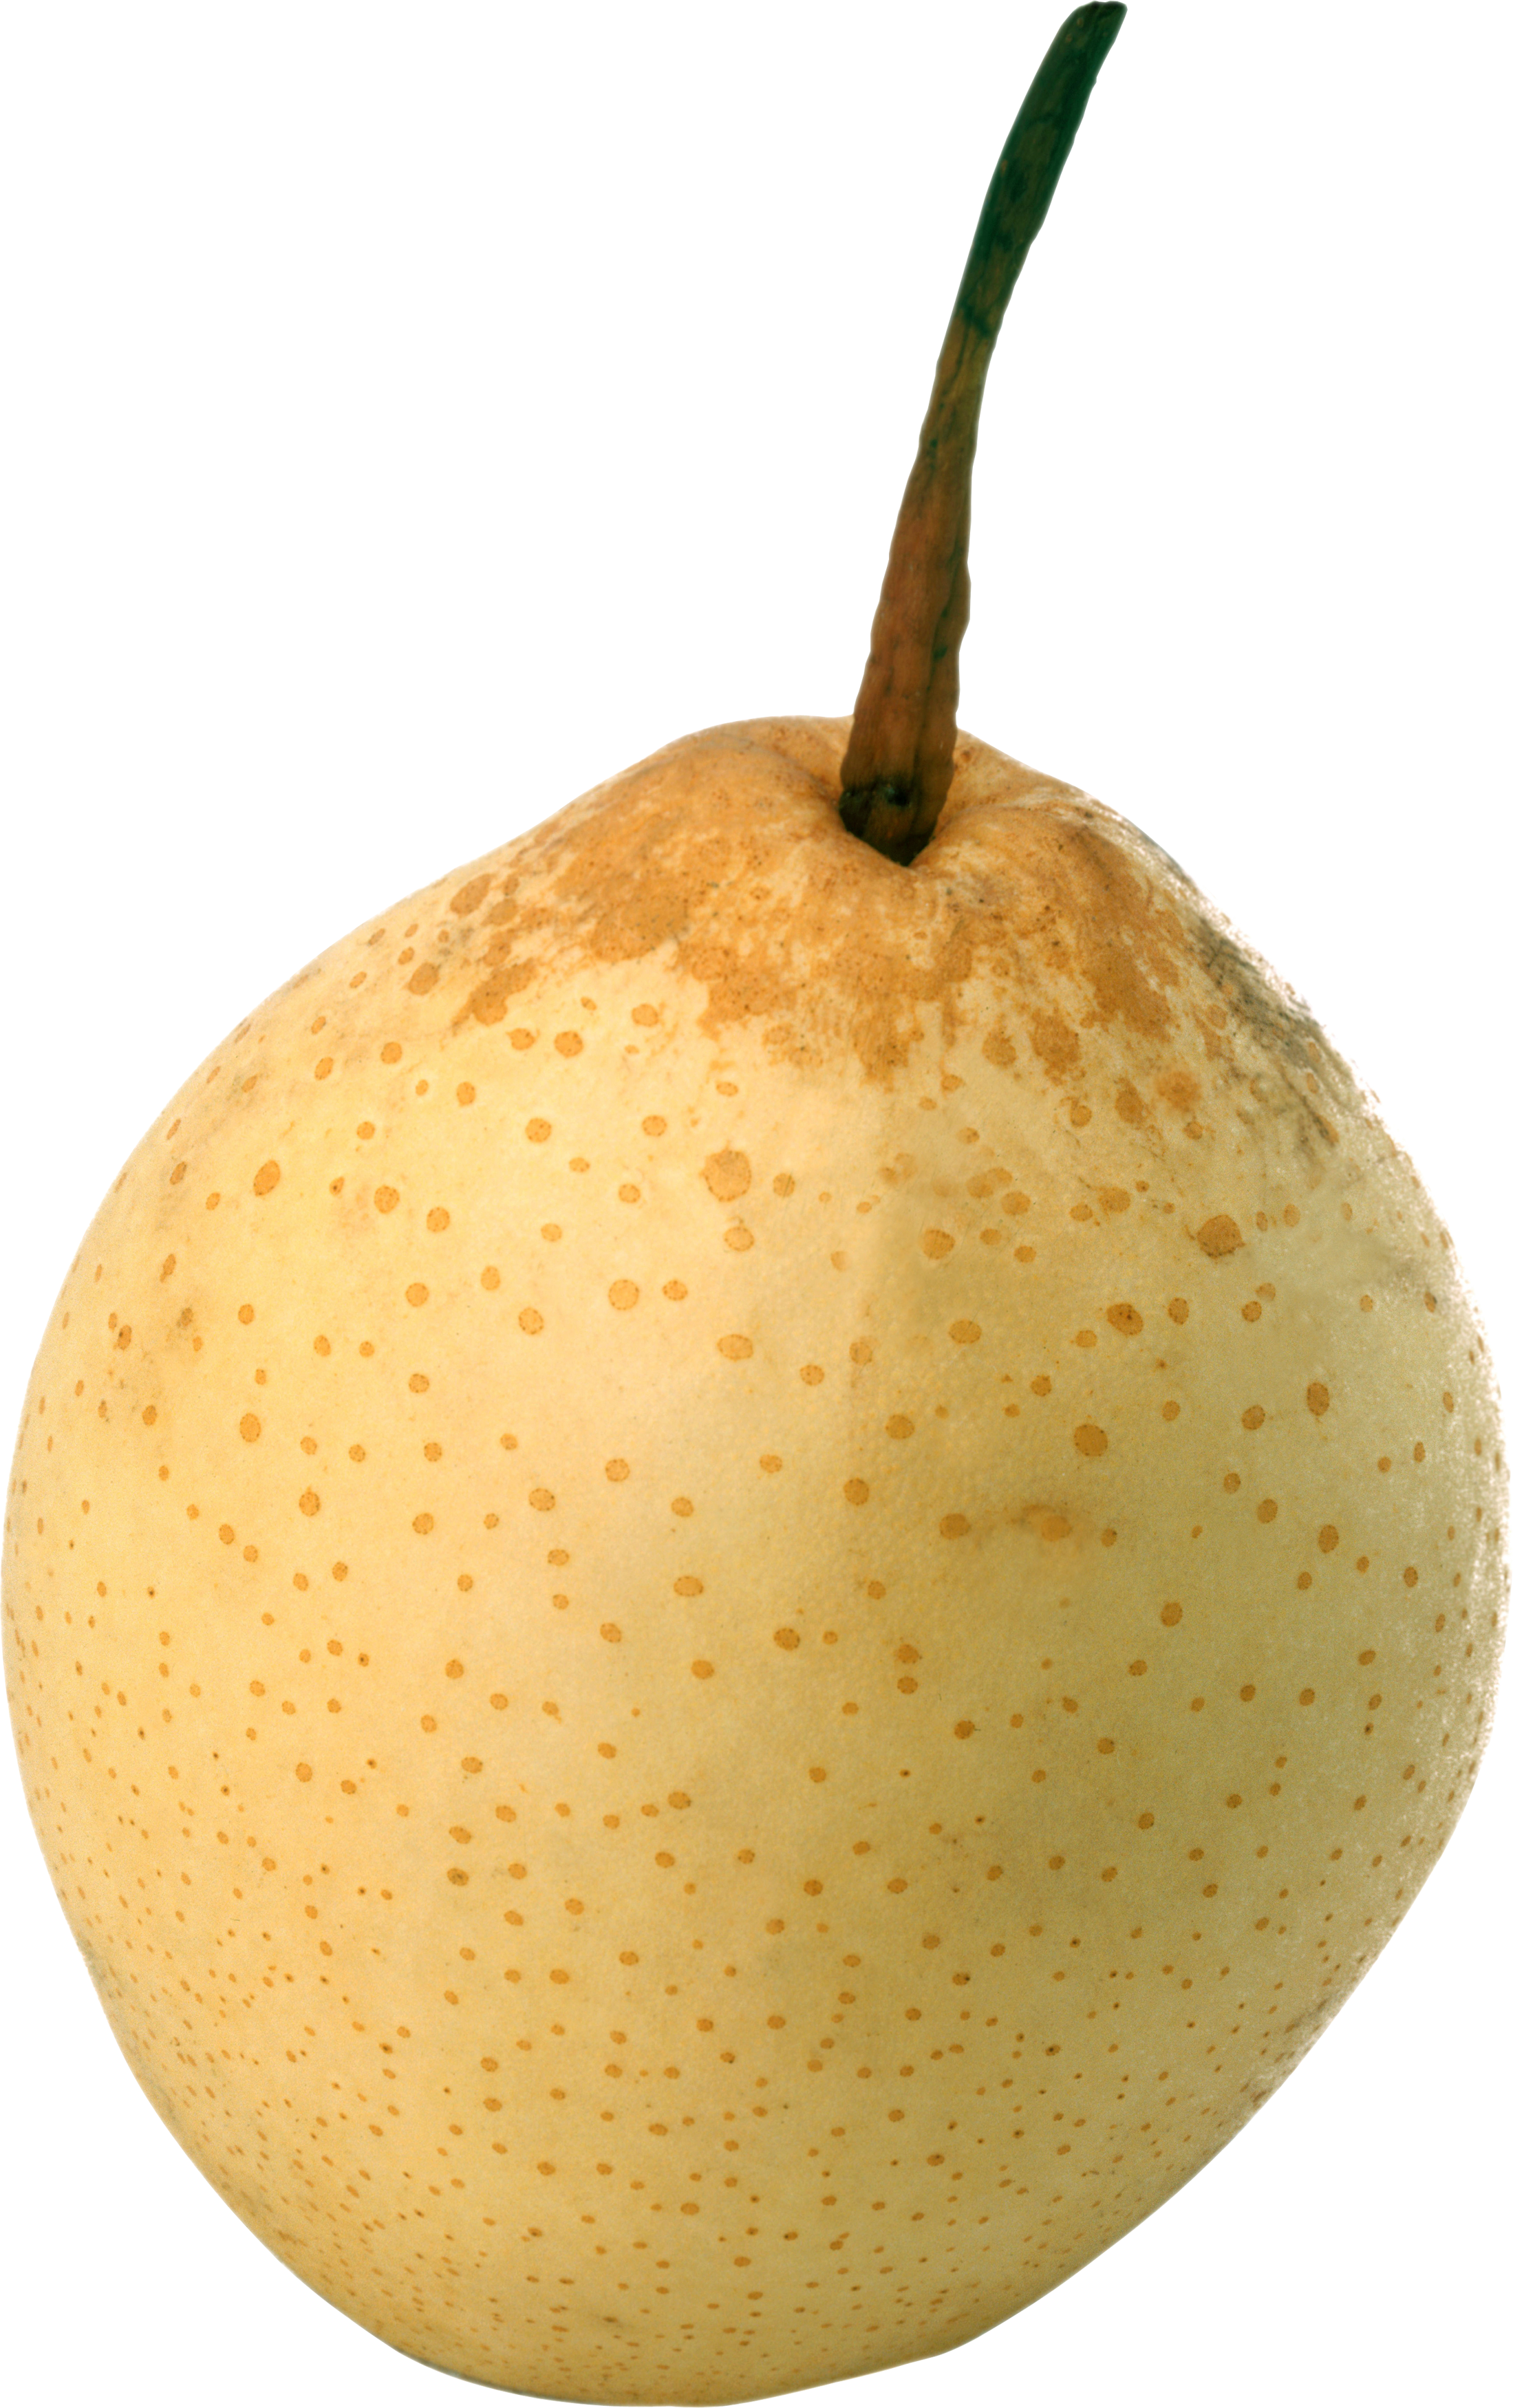 A Close Up Of A Pear